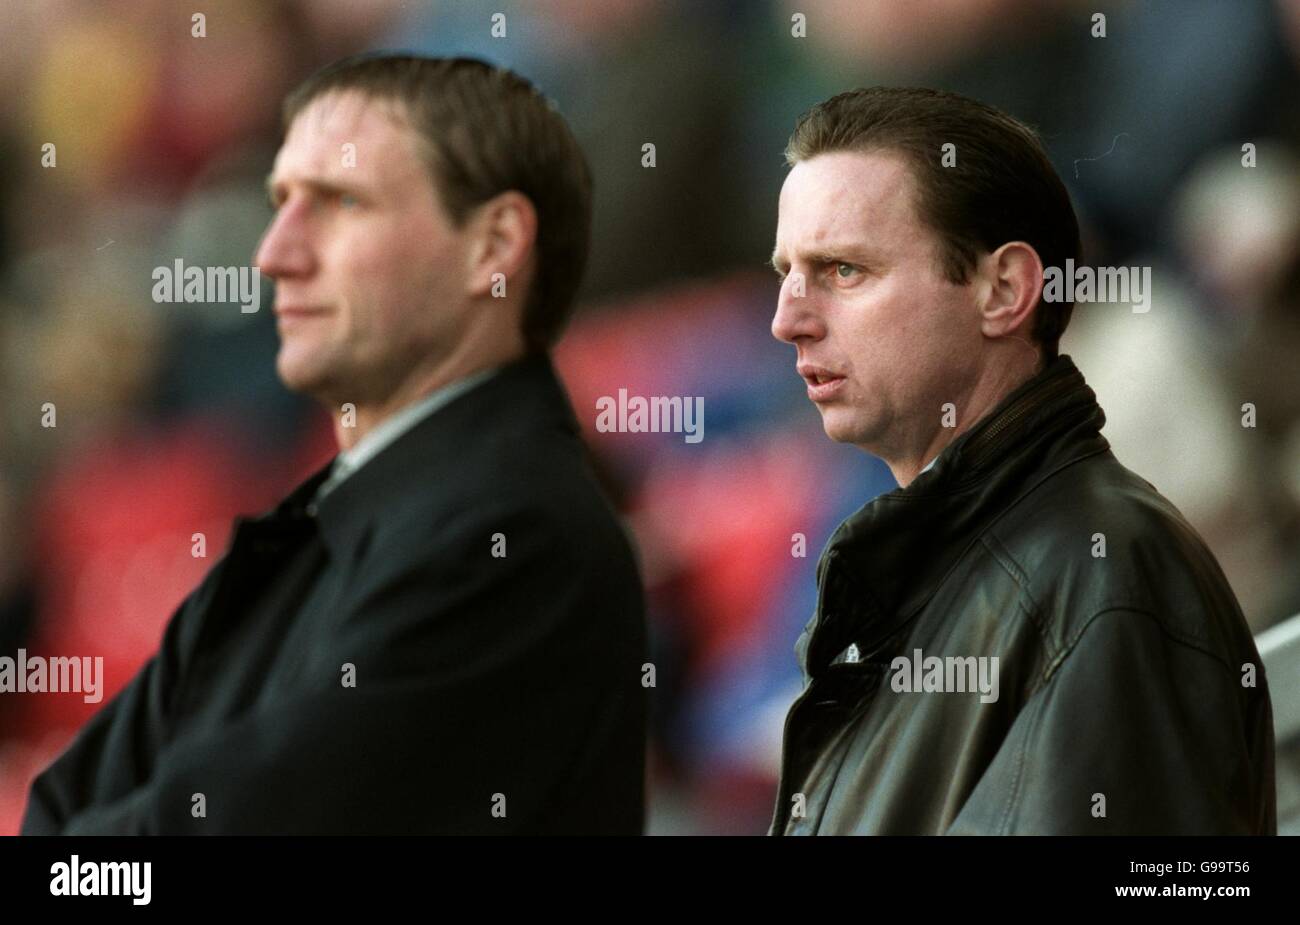 Soccer - Nationwide League Division Two - Wigan Athletic v Millwall. Millwall joint managers Alan McLeary (left) and Keith Stevens (right) Stock Photo